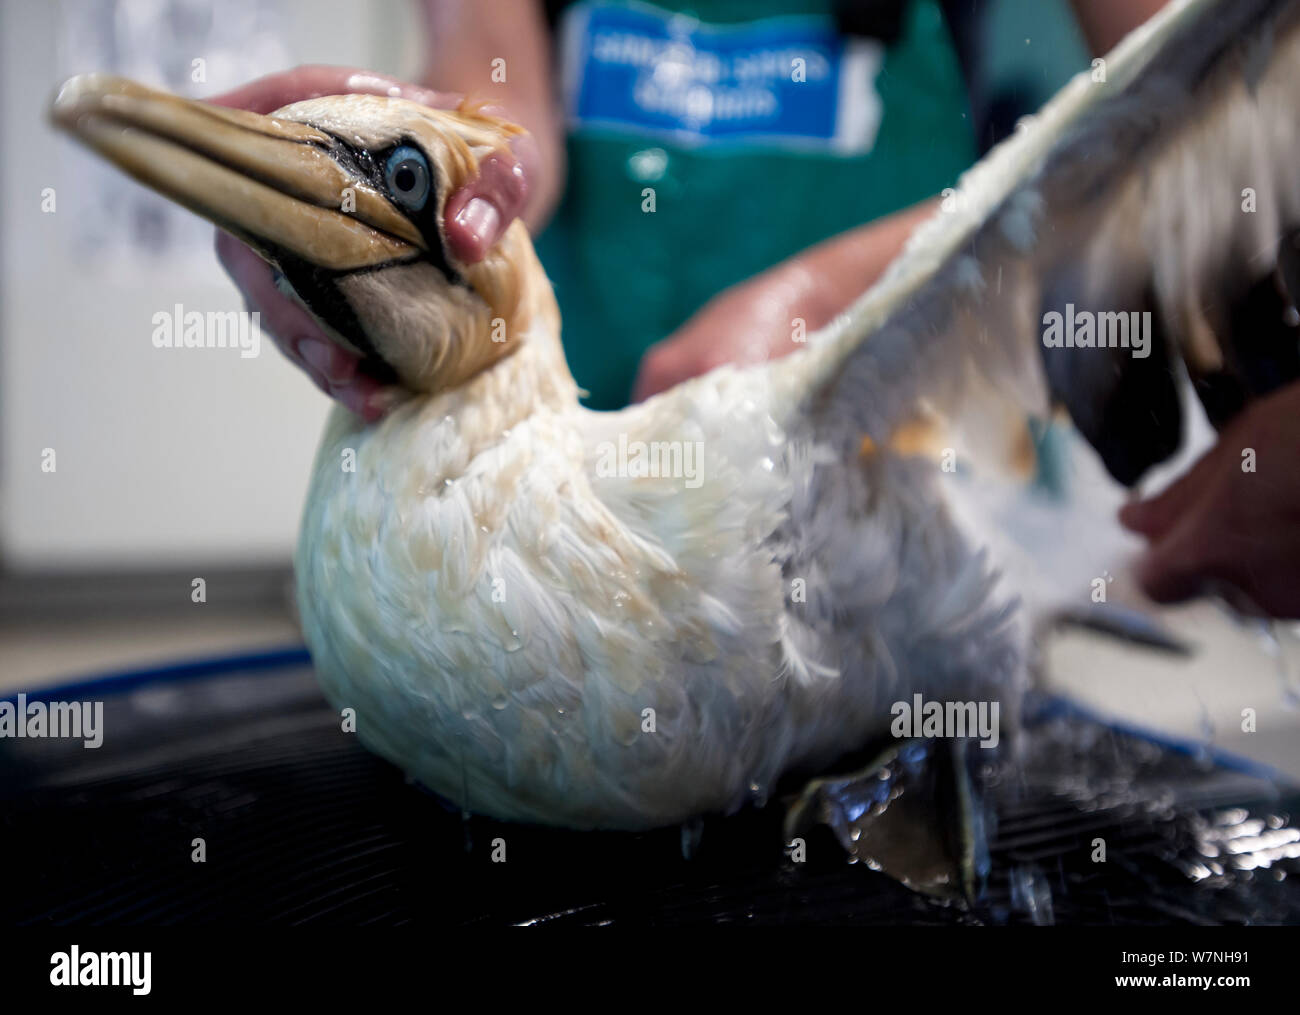 Cape Gannet (Morus capensis) being rinsed after a wash with soap to remove the oil that coated its feathers at the Southern African Foundation for the Conservation of Coastal Birds (SANCCOB). Vulnerable species. Third place in Mankind and Nature  portfolio category of Melvita Nature Images Awards  2012, organised by Terre Sauvage. Stock Photo